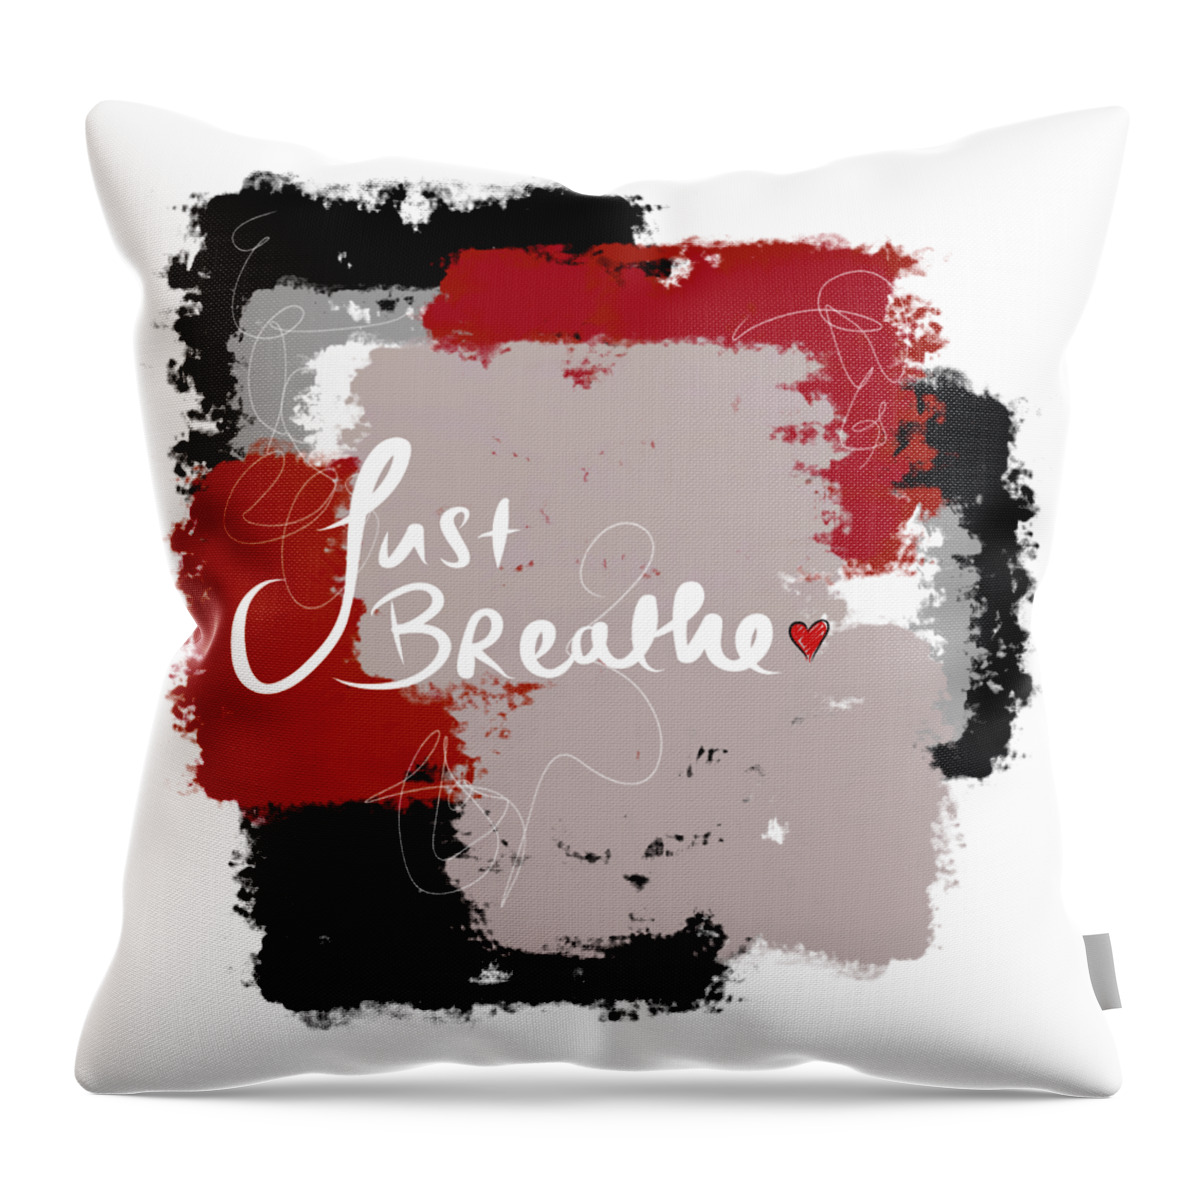 Affirmations Throw Pillow featuring the digital art Just Breathe by Amber Lasche